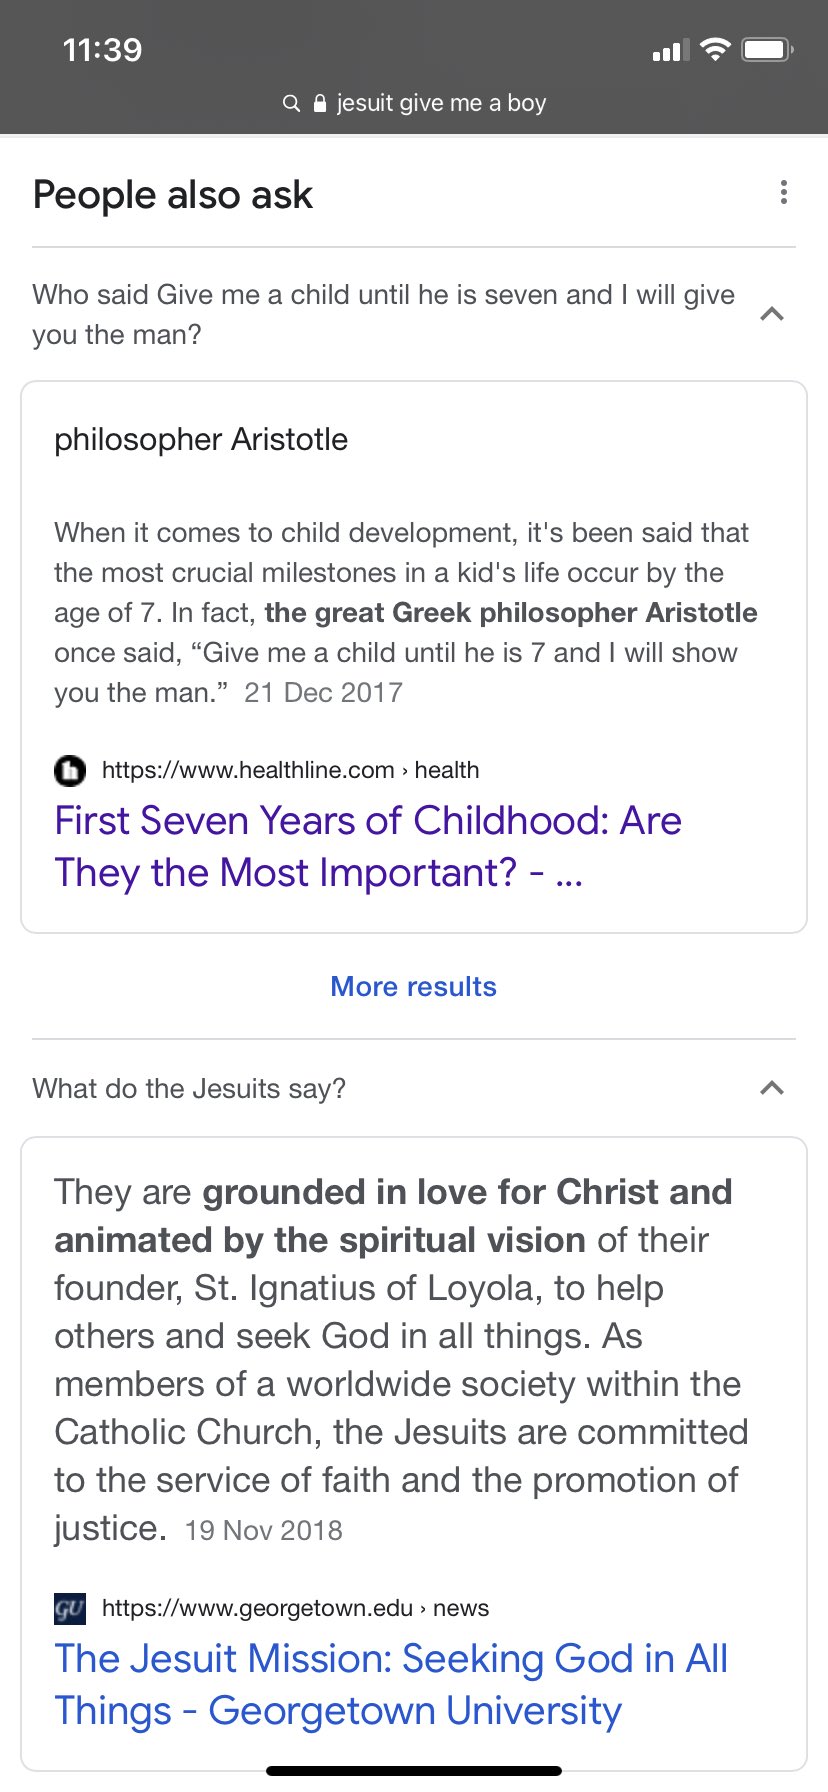 First Seven Years of Childhood: Are They the Most Important?